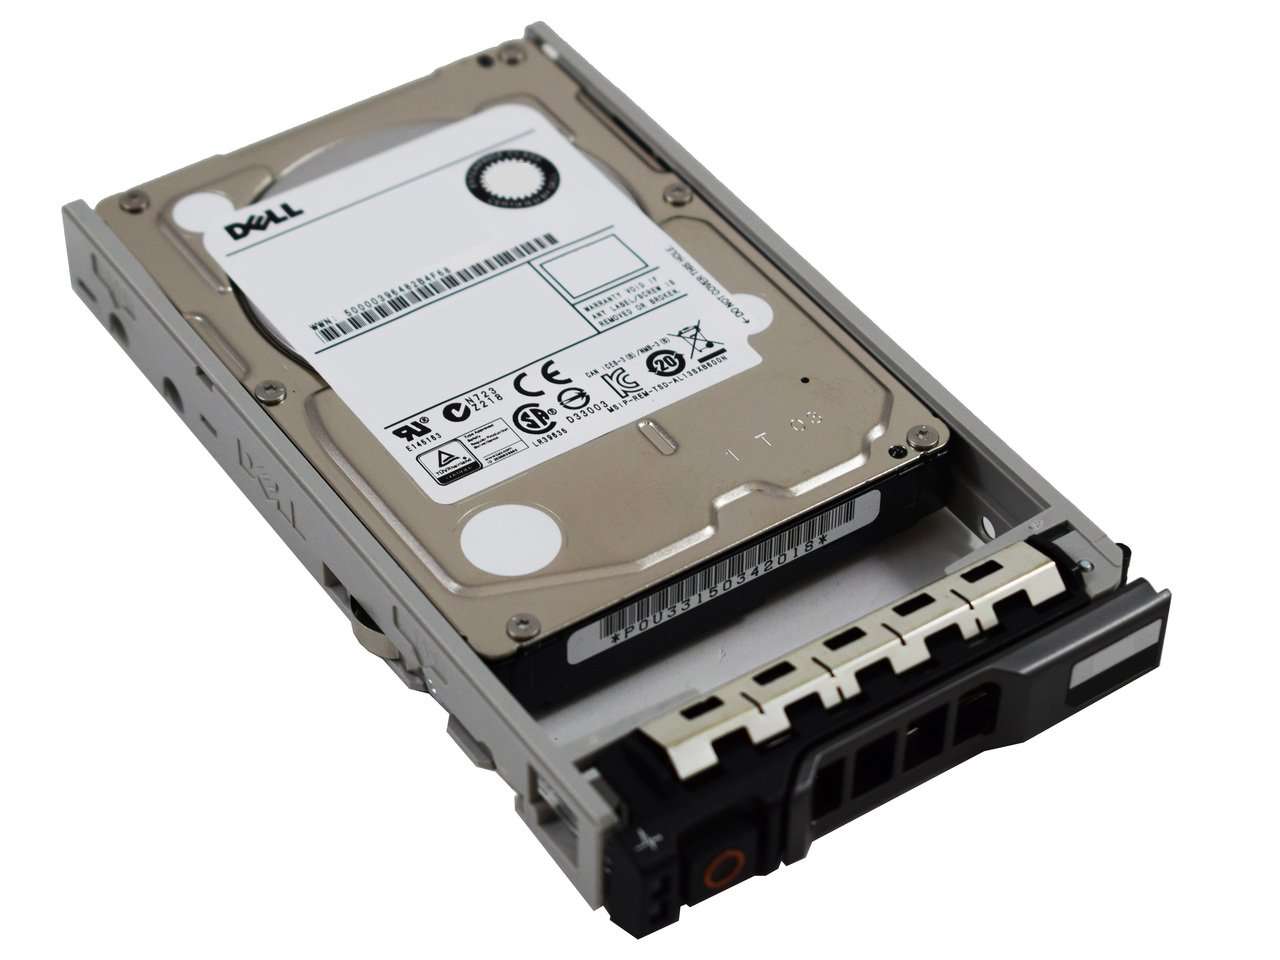 Dell G13 469-3743 600GB 10K RPM SAS 6Gb/s 512n 2.5" Manufacturer Recertified HDD